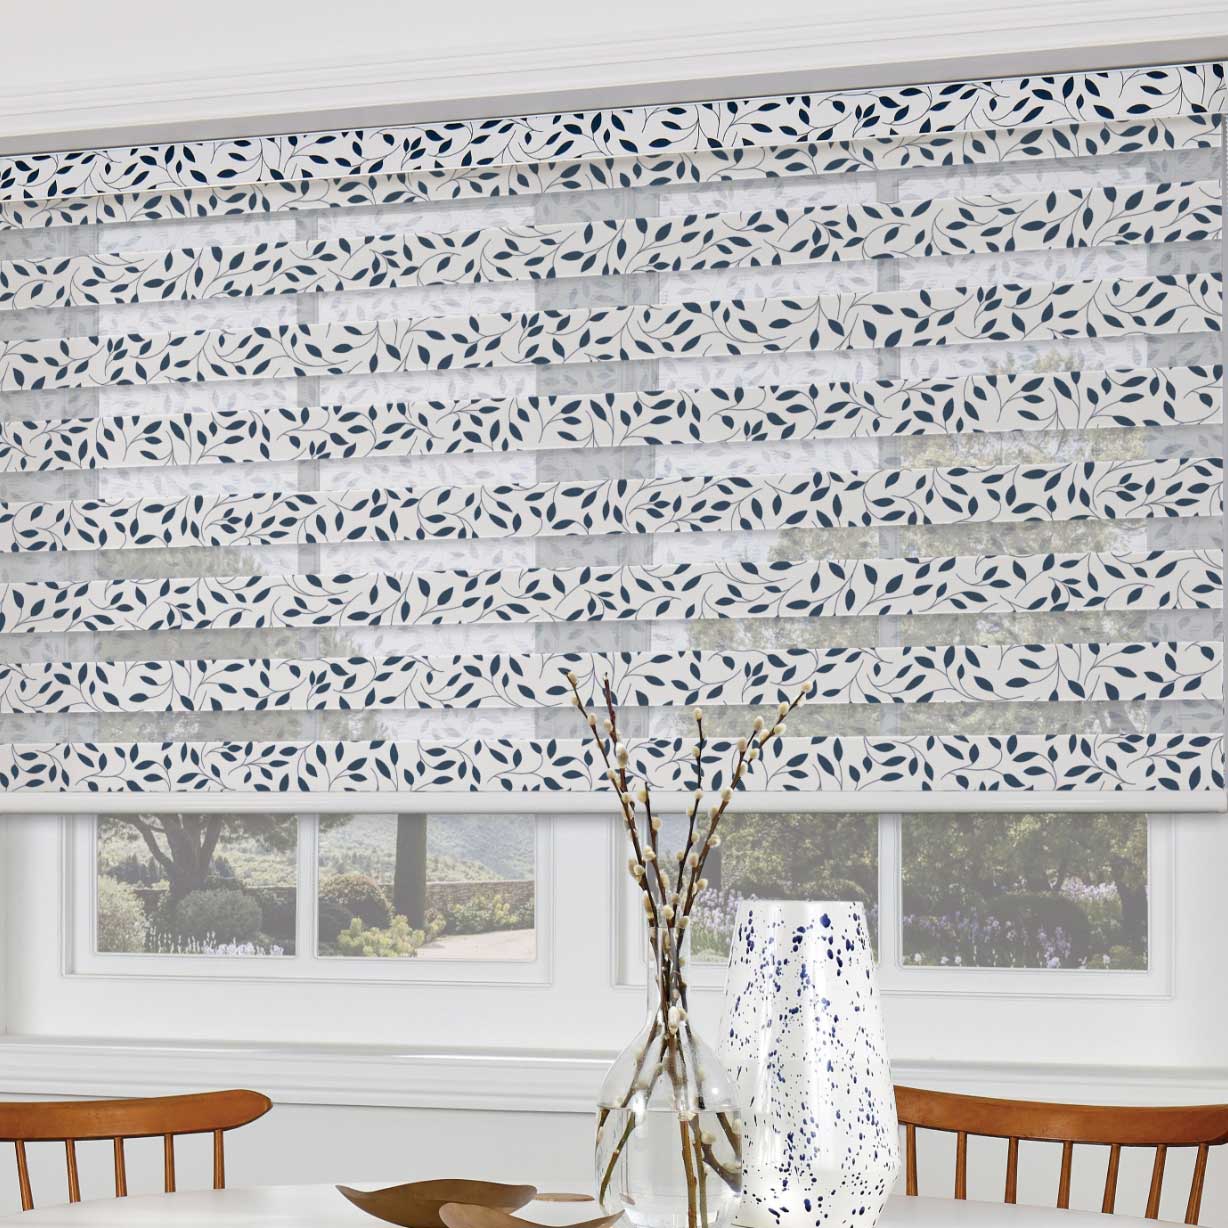 Leaf patterned white Day Night blind on bright kitchen window next to a dining table and wooden chairs